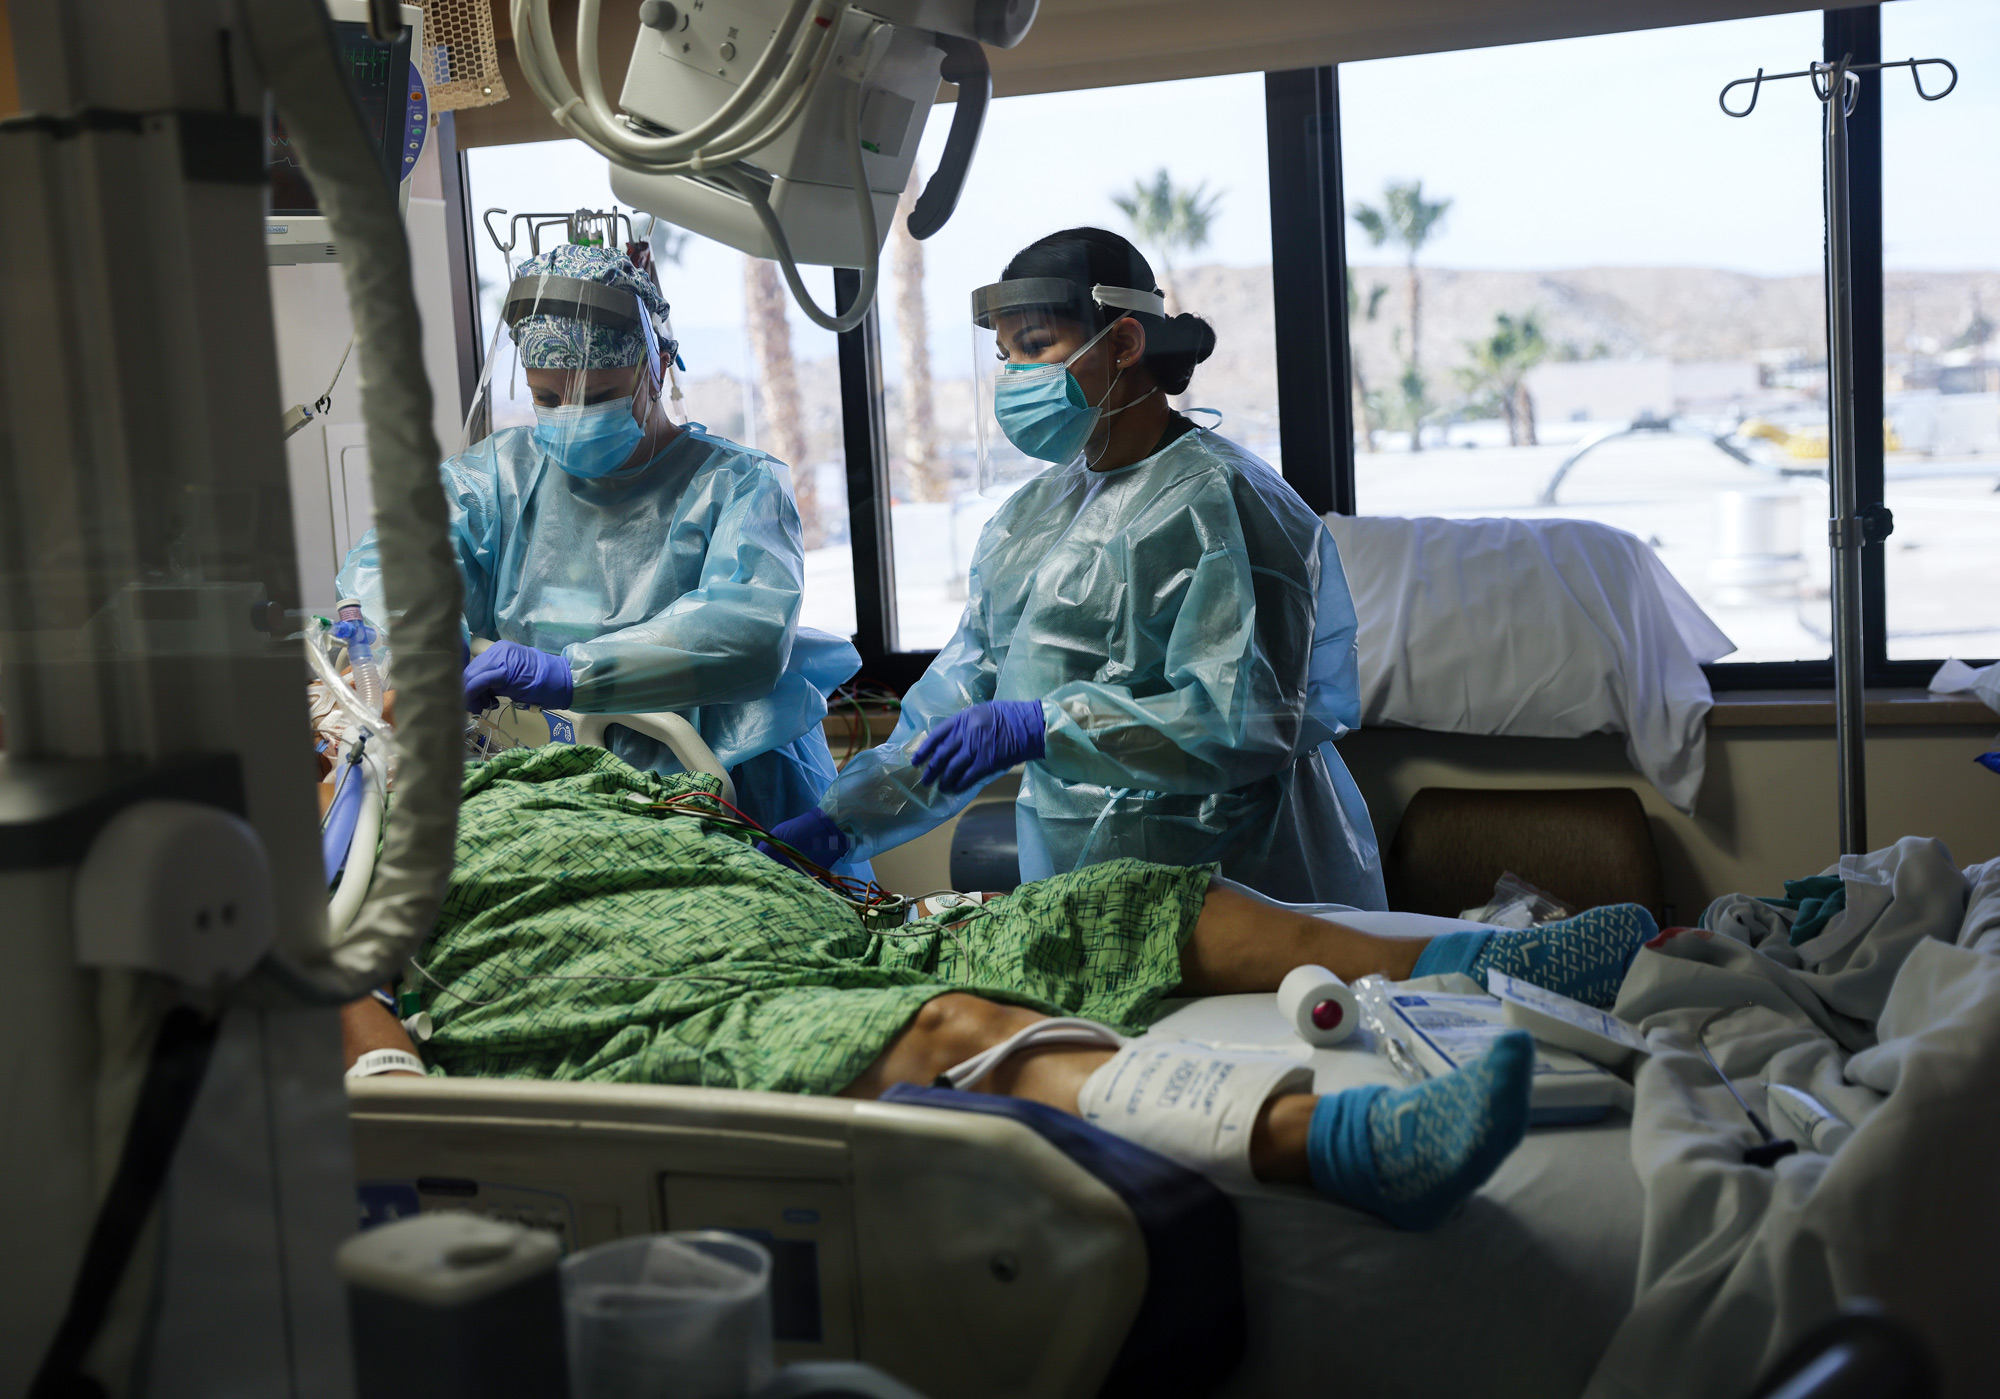 Clinicians care for a COVID-19 patient in the Intensive Care Unit at Providence St. Mary Medical Center on December 23, 2020 in Apple Valley, California.  